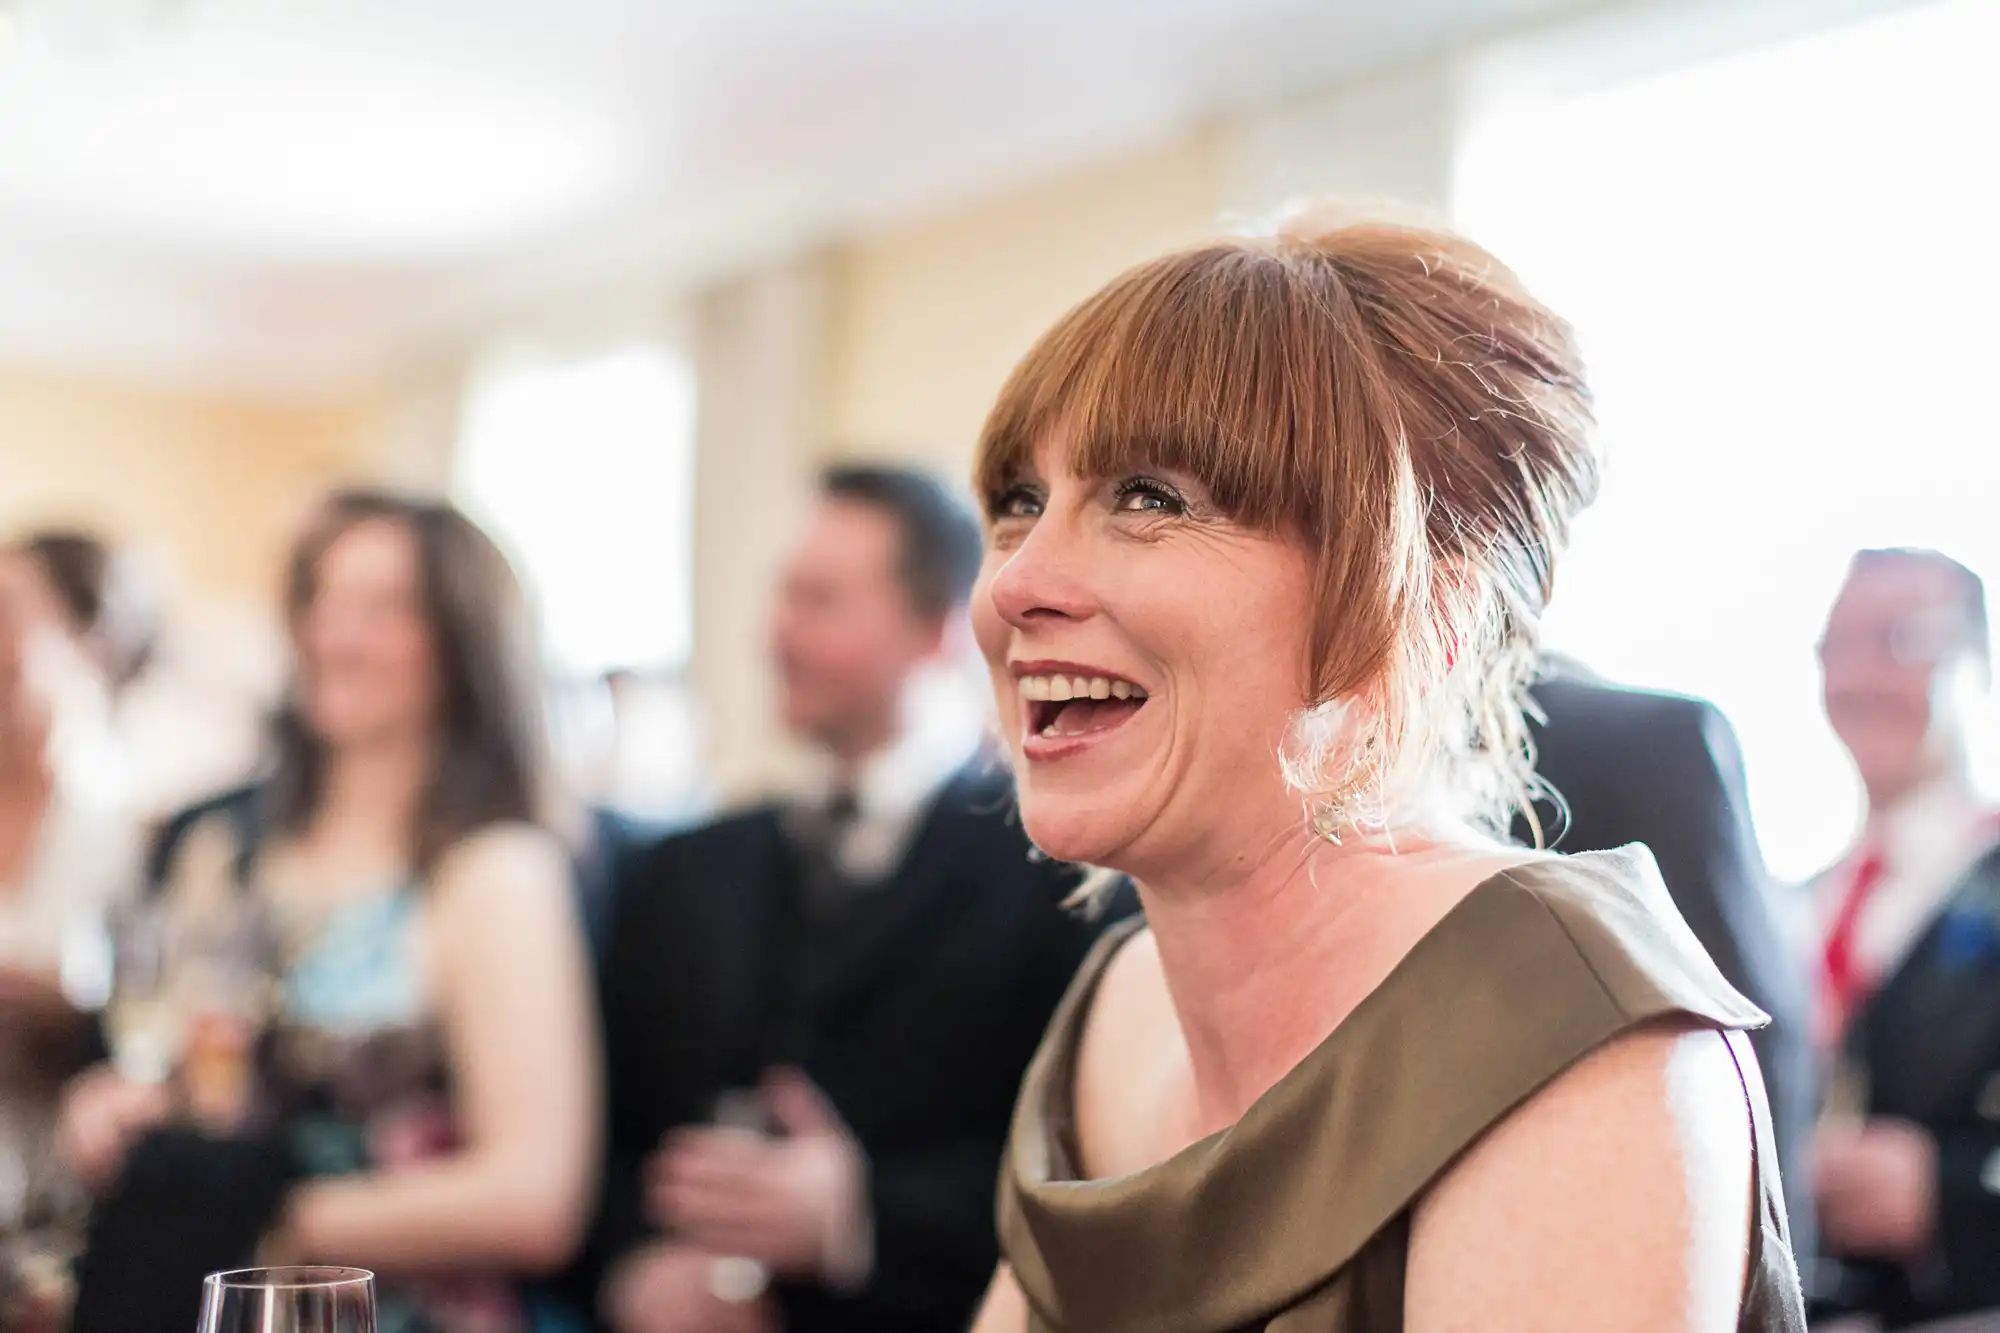 Woman with short red hair laughing at a social event, wearing an elegant brown dress. blurred guests in the background.